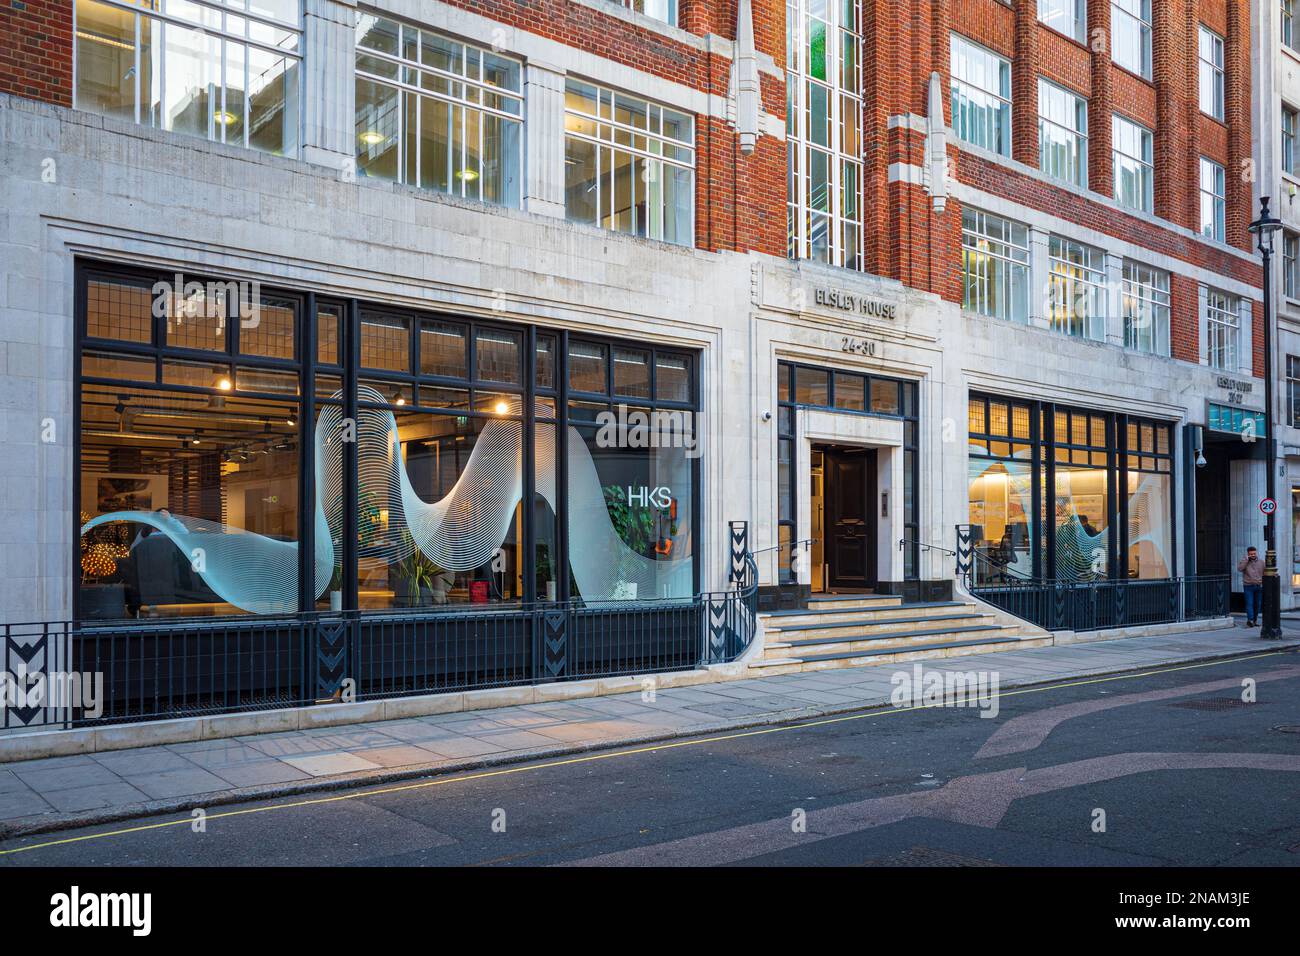 HOK London Design Studio at 90 Whitfield St London. HOK is a global design, architecture, engineering and planning firm. Stock Photo